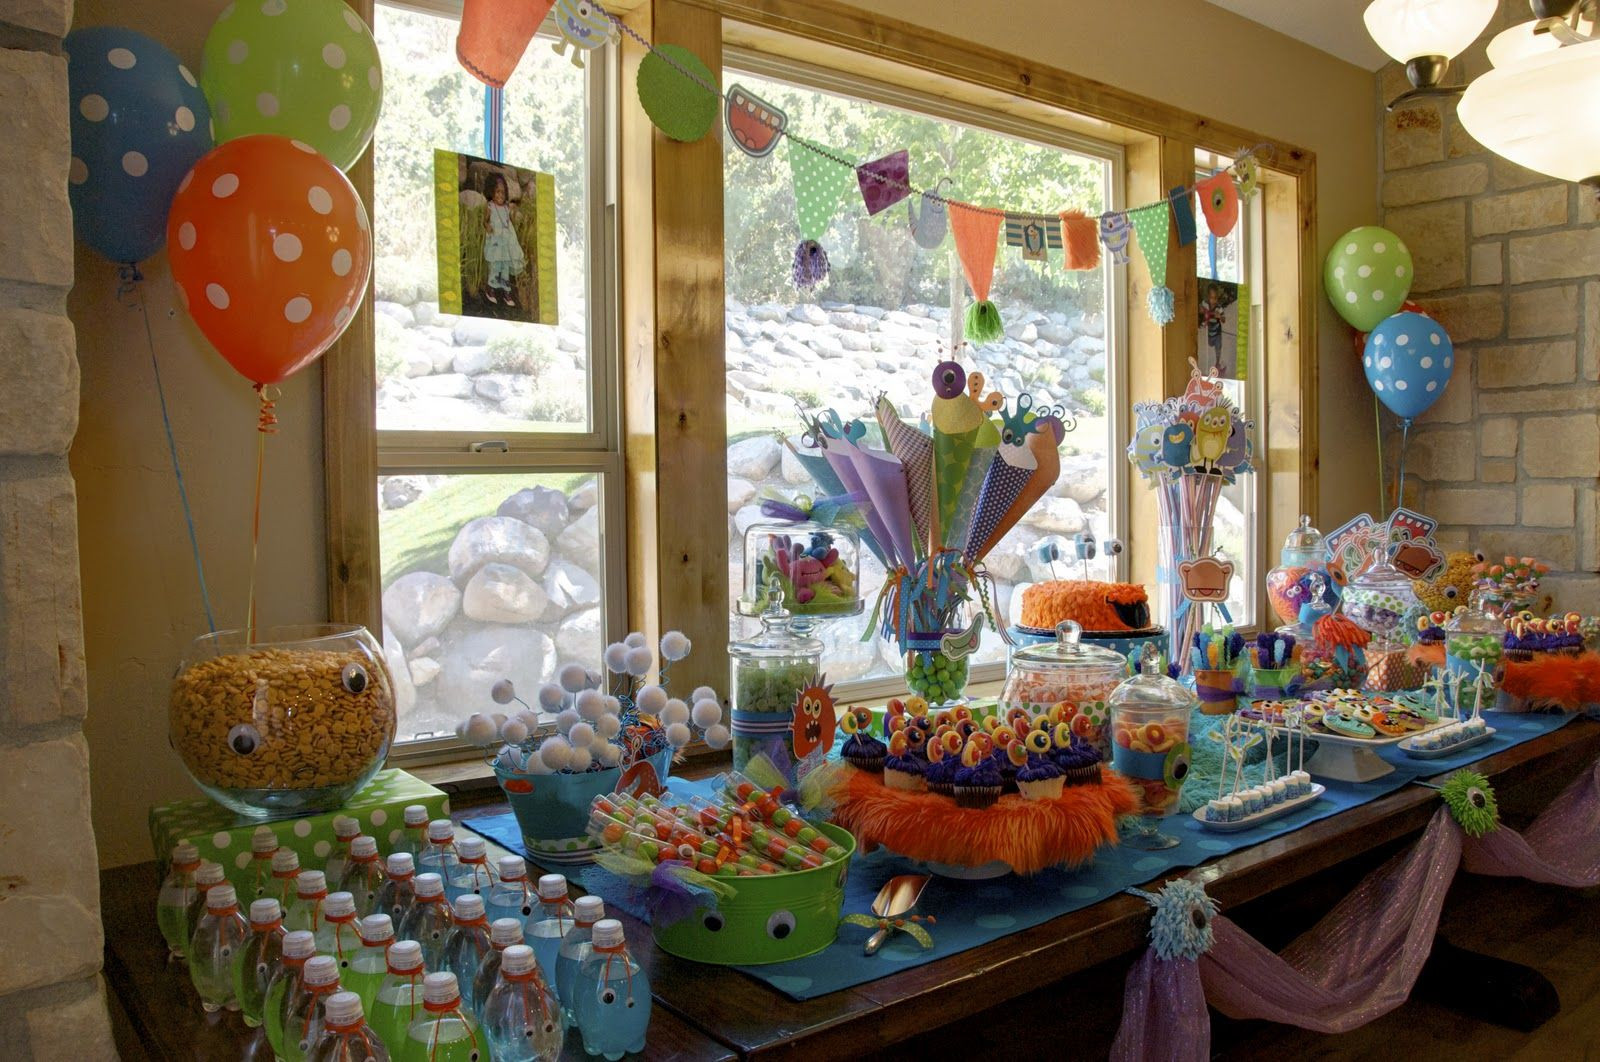 6 Year Old Birthday Party Ideas Winter
 My friends birthday is in the winter and she wanteâ Š